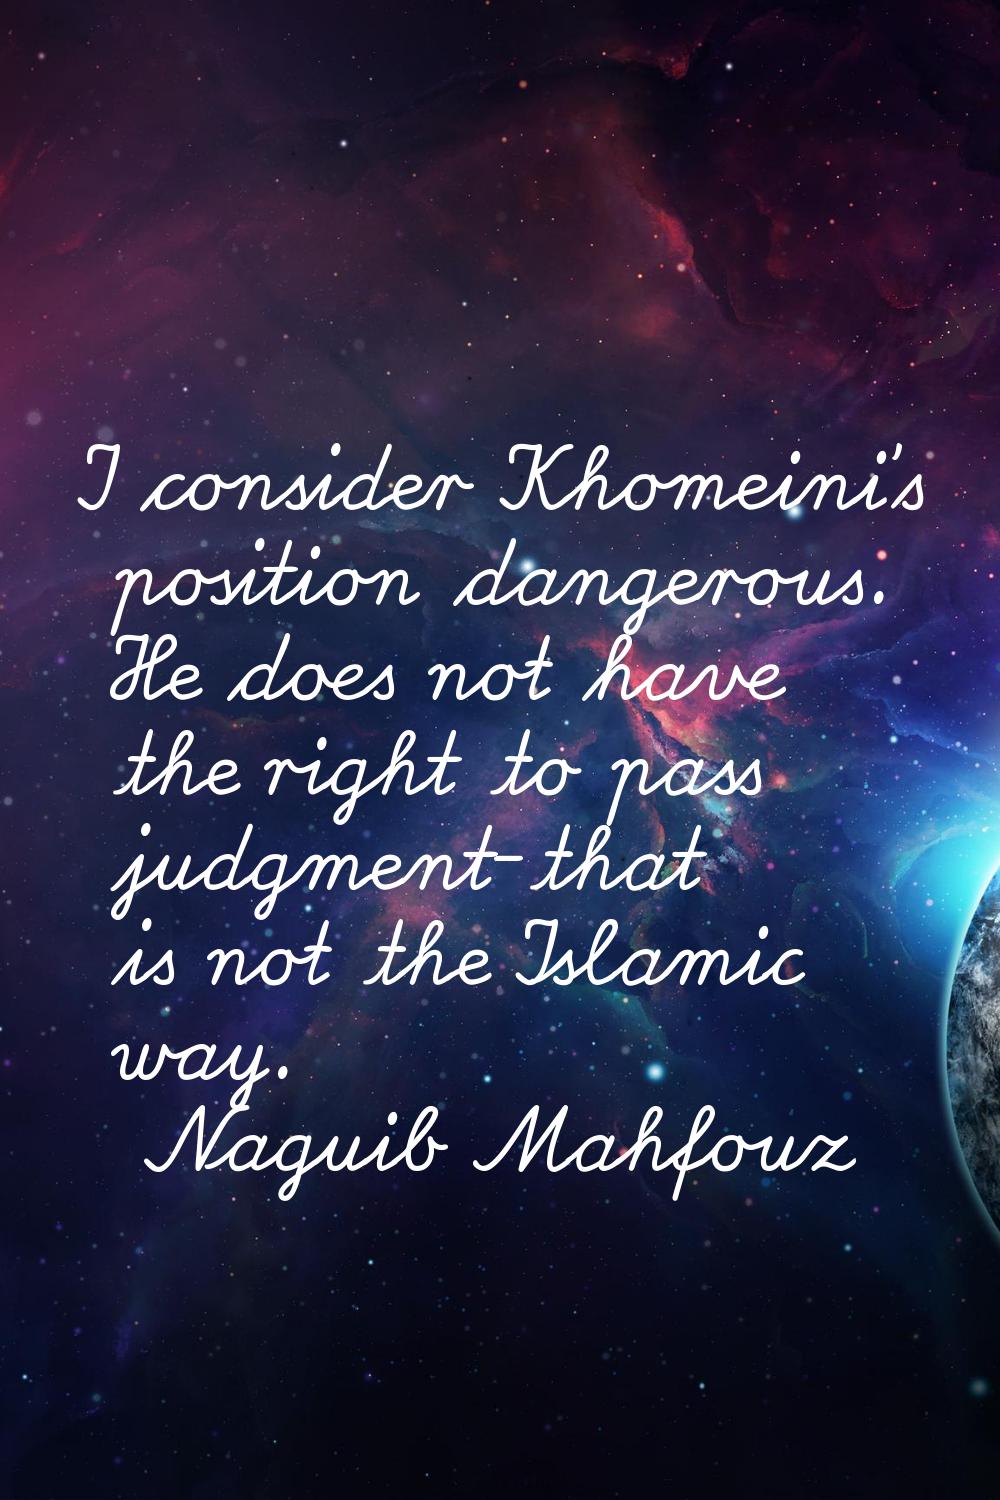 I consider Khomeini's position dangerous. He does not have the right to pass judgment-that is not t